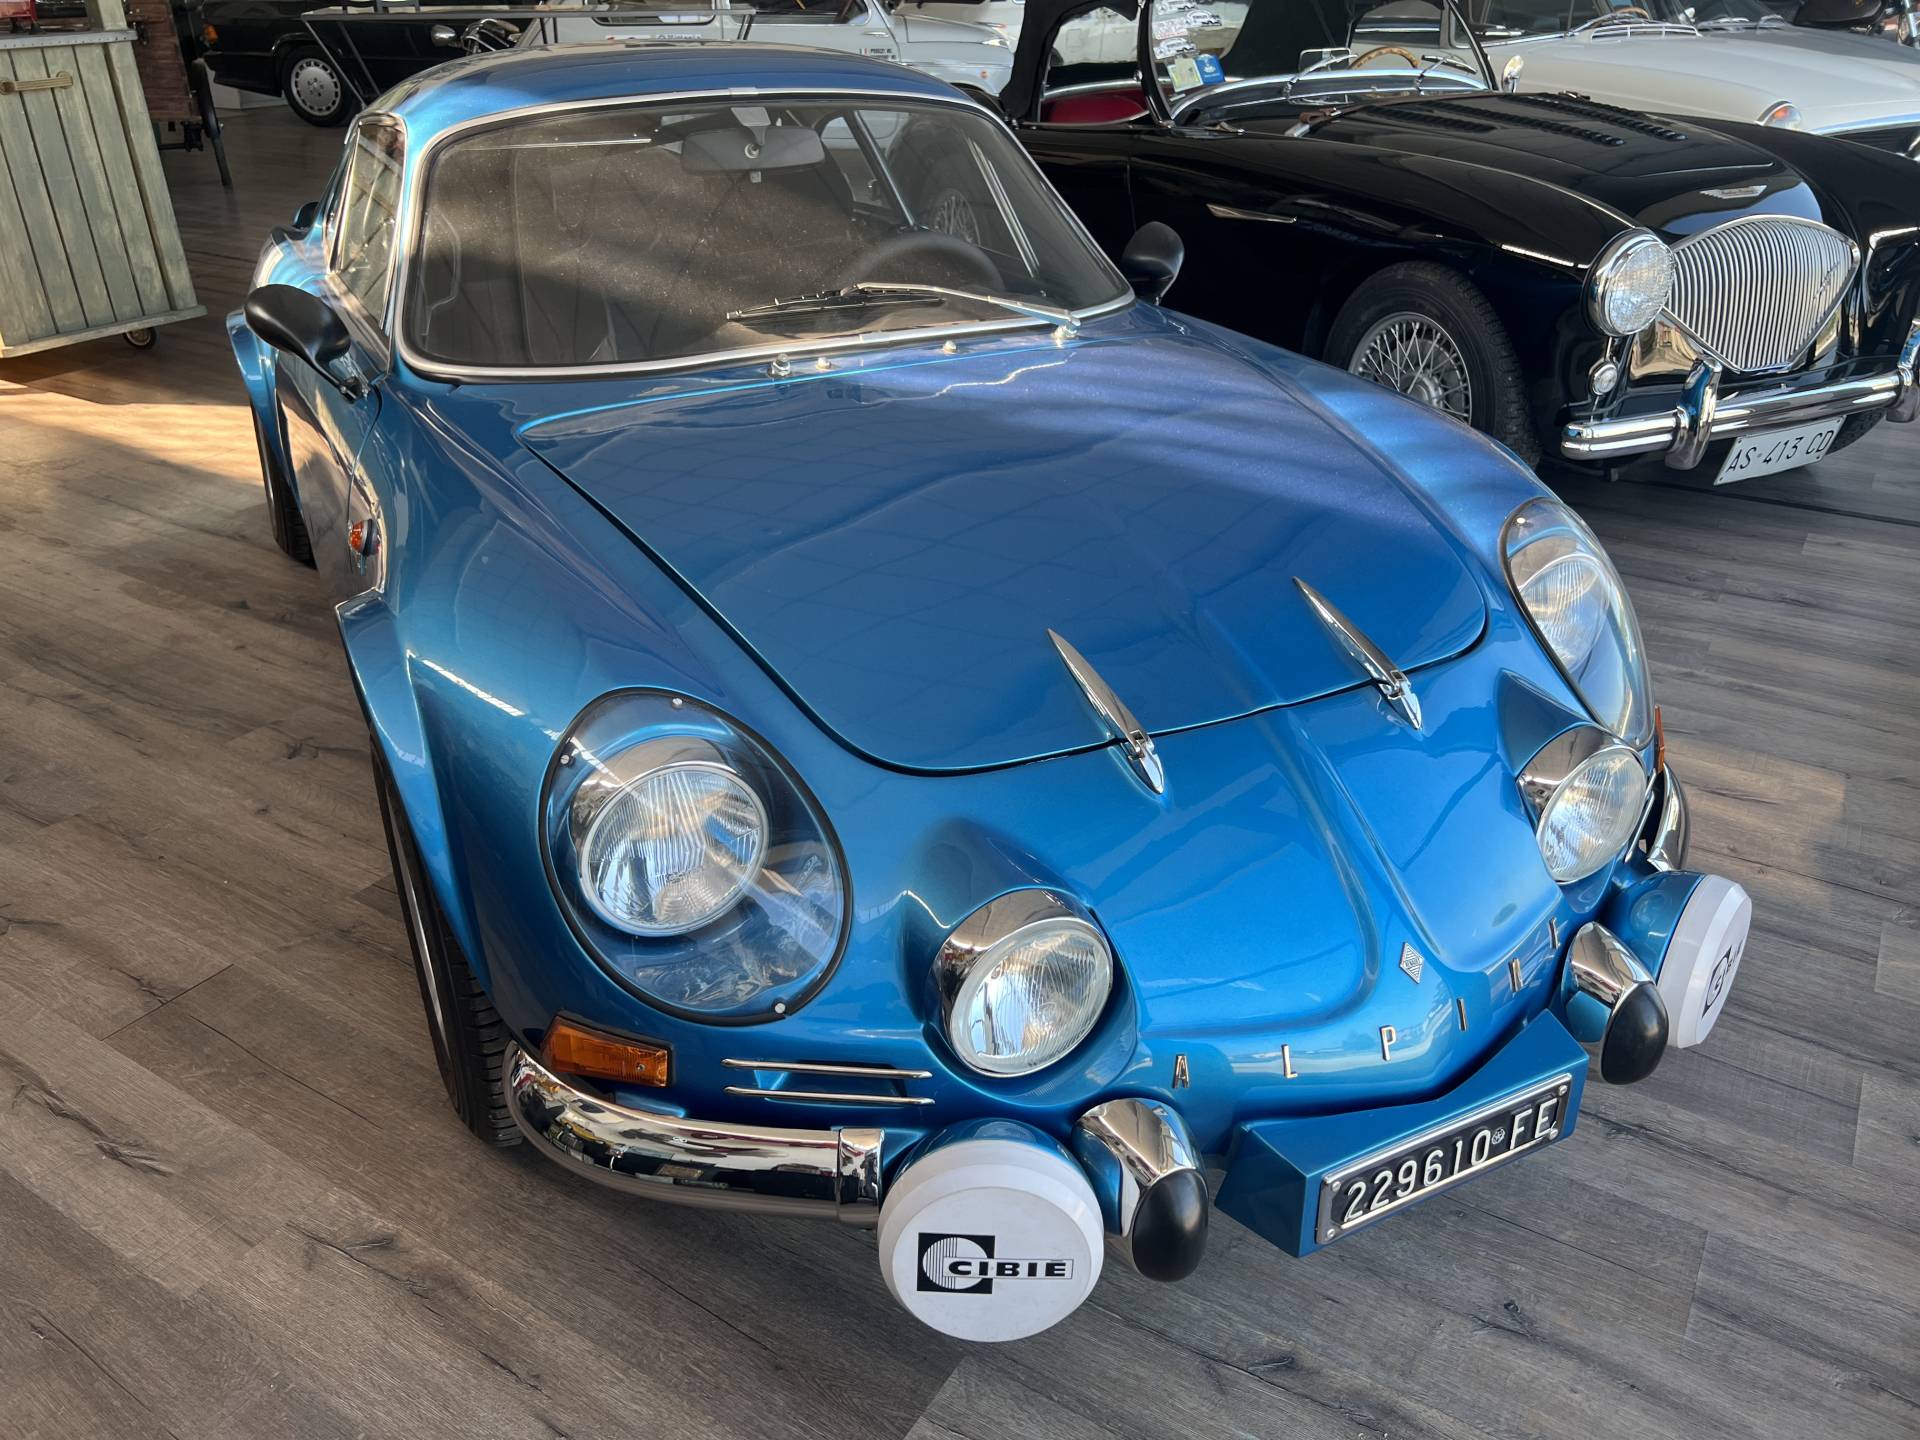 renault introduces alpine A110 production line in dieppe, france